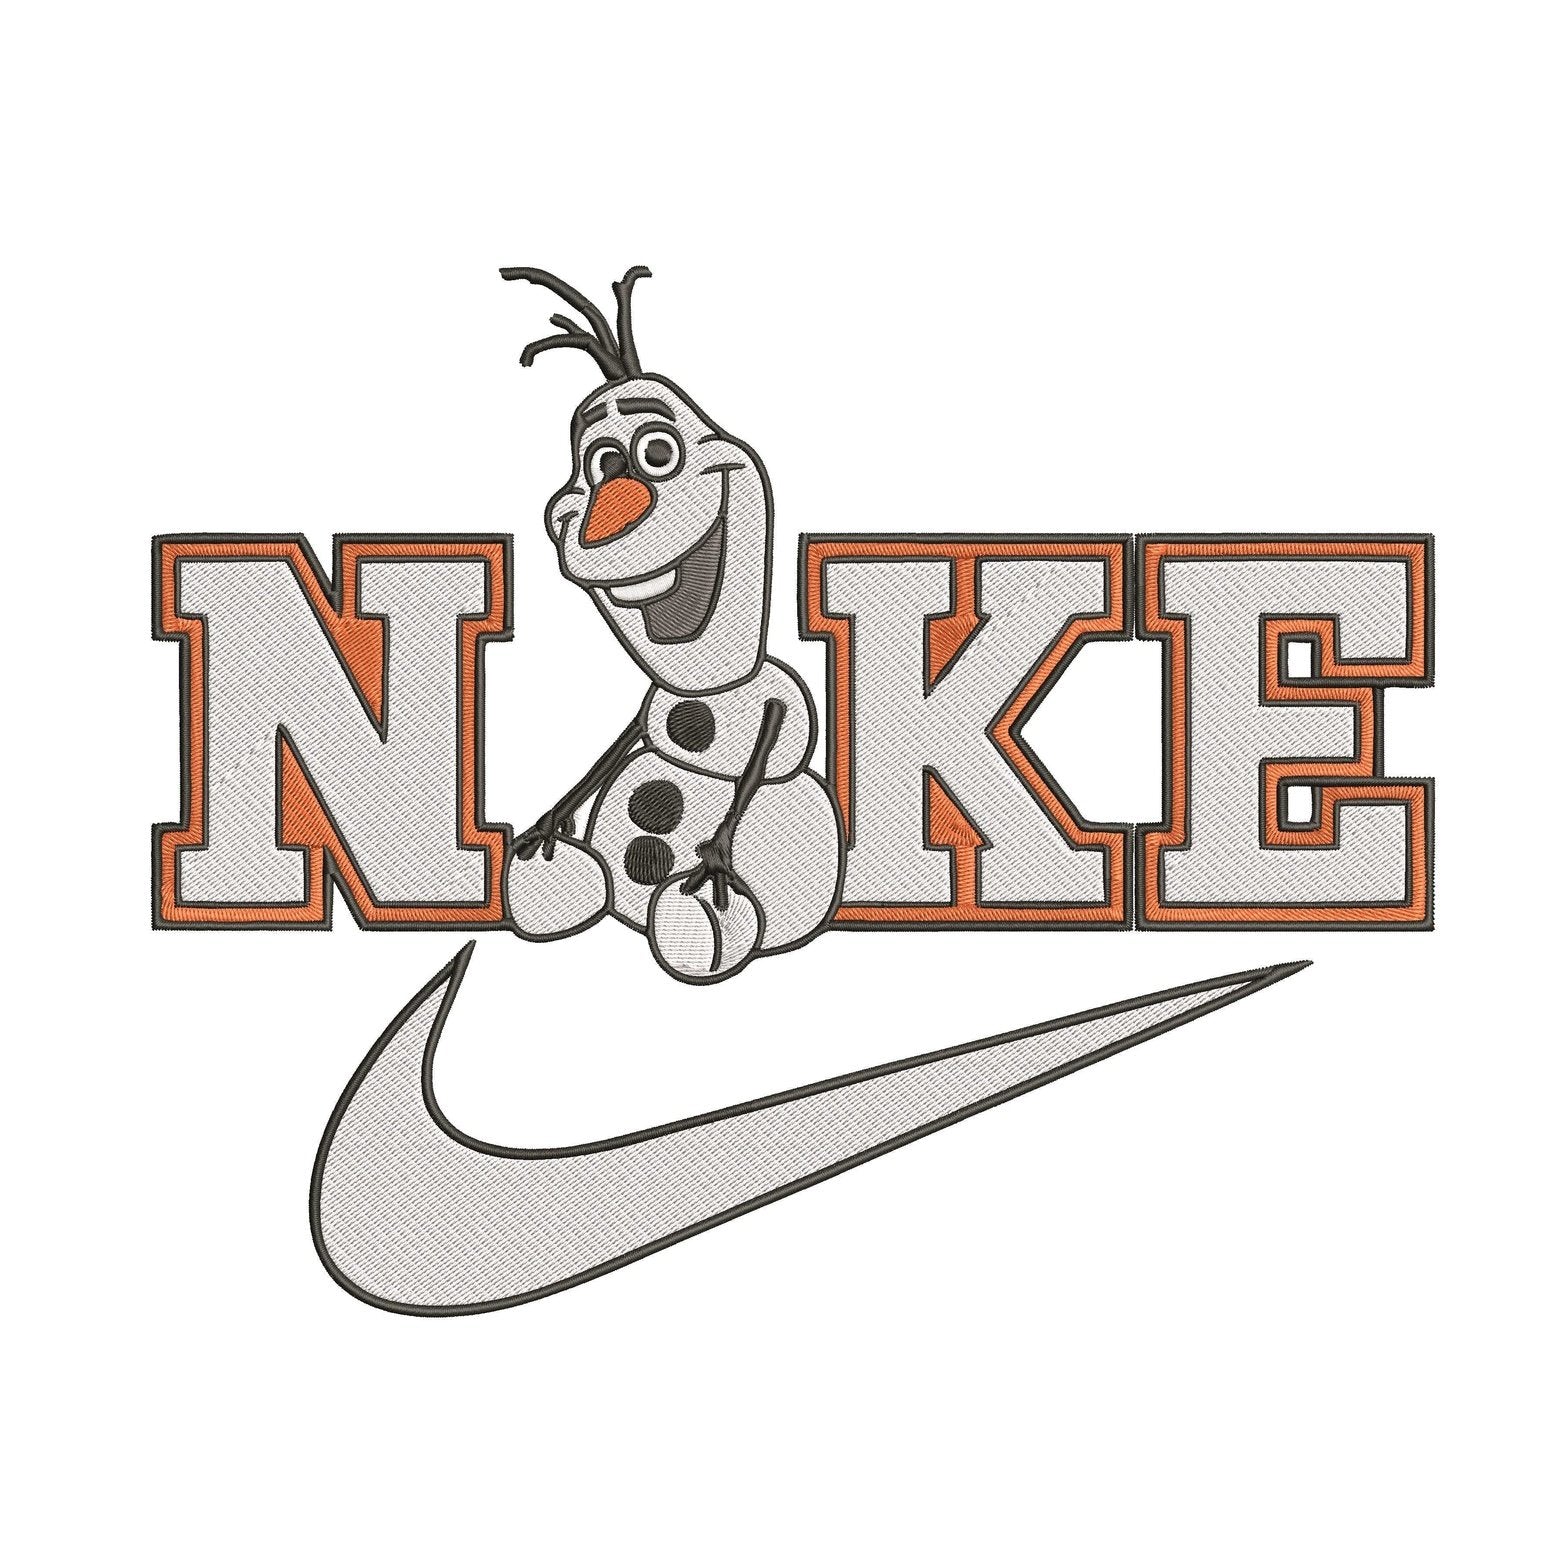 Nike Olaf - Embroidery Design FineryEmbroidery